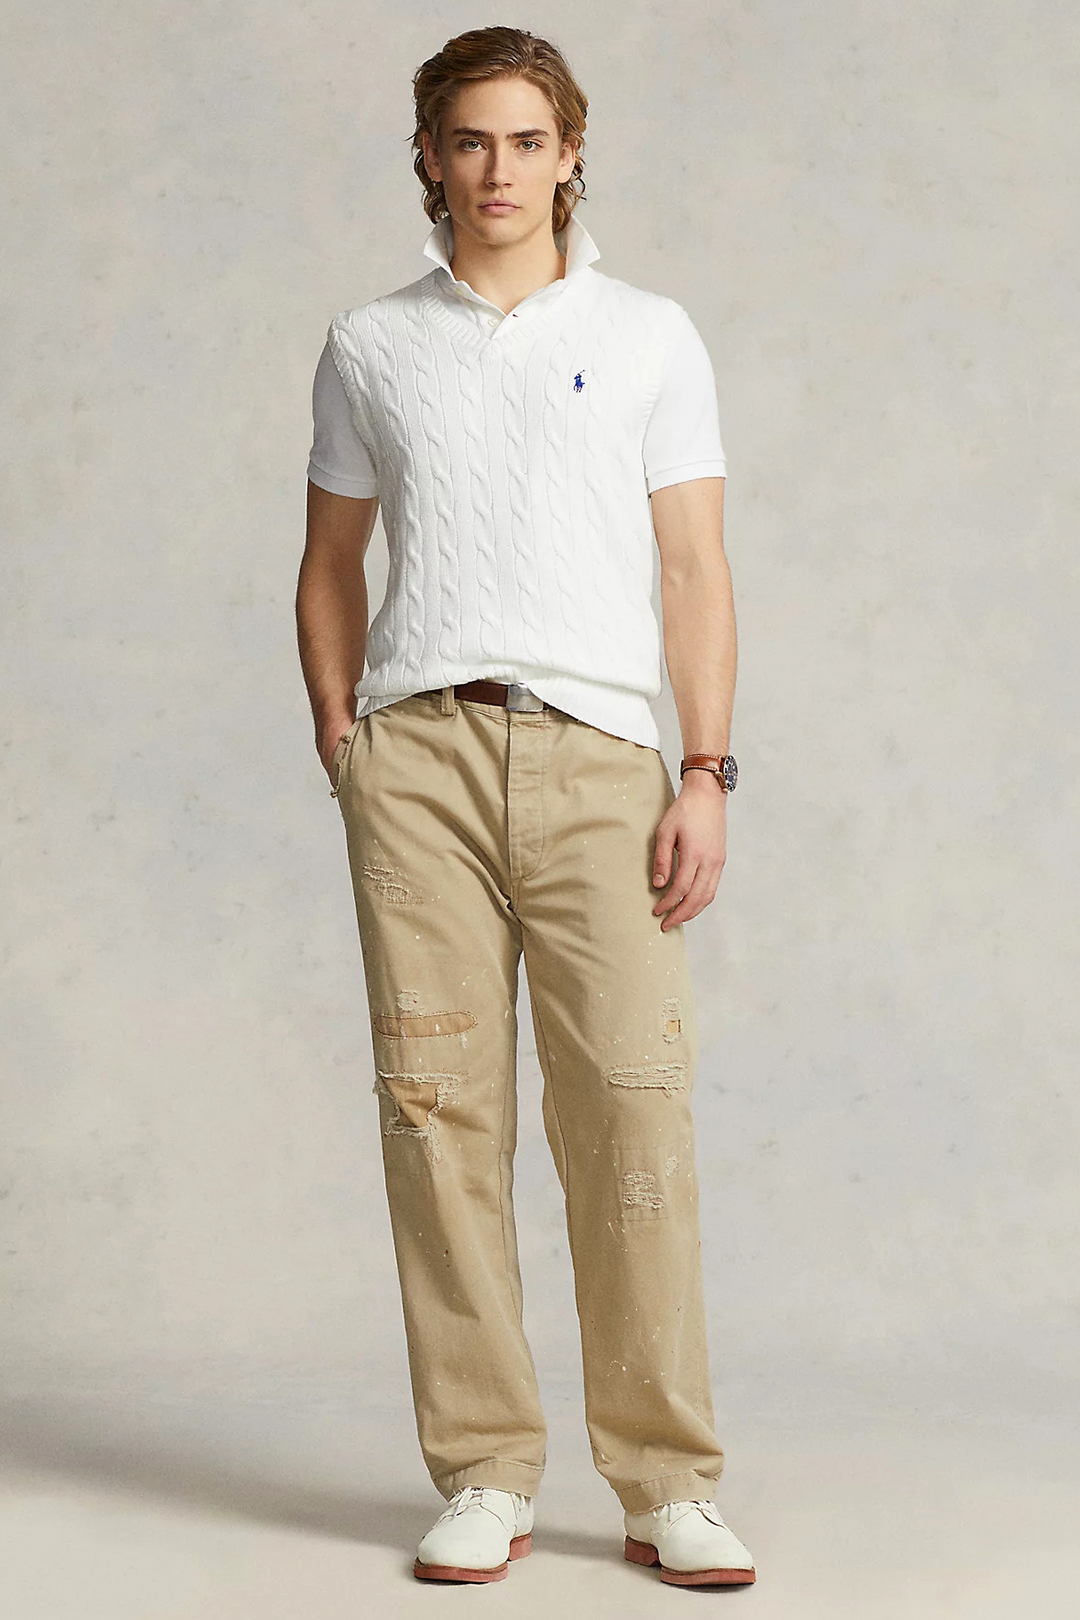 White sweater vest, white t-shirt, khaki chinos and beige derby shoes outfit